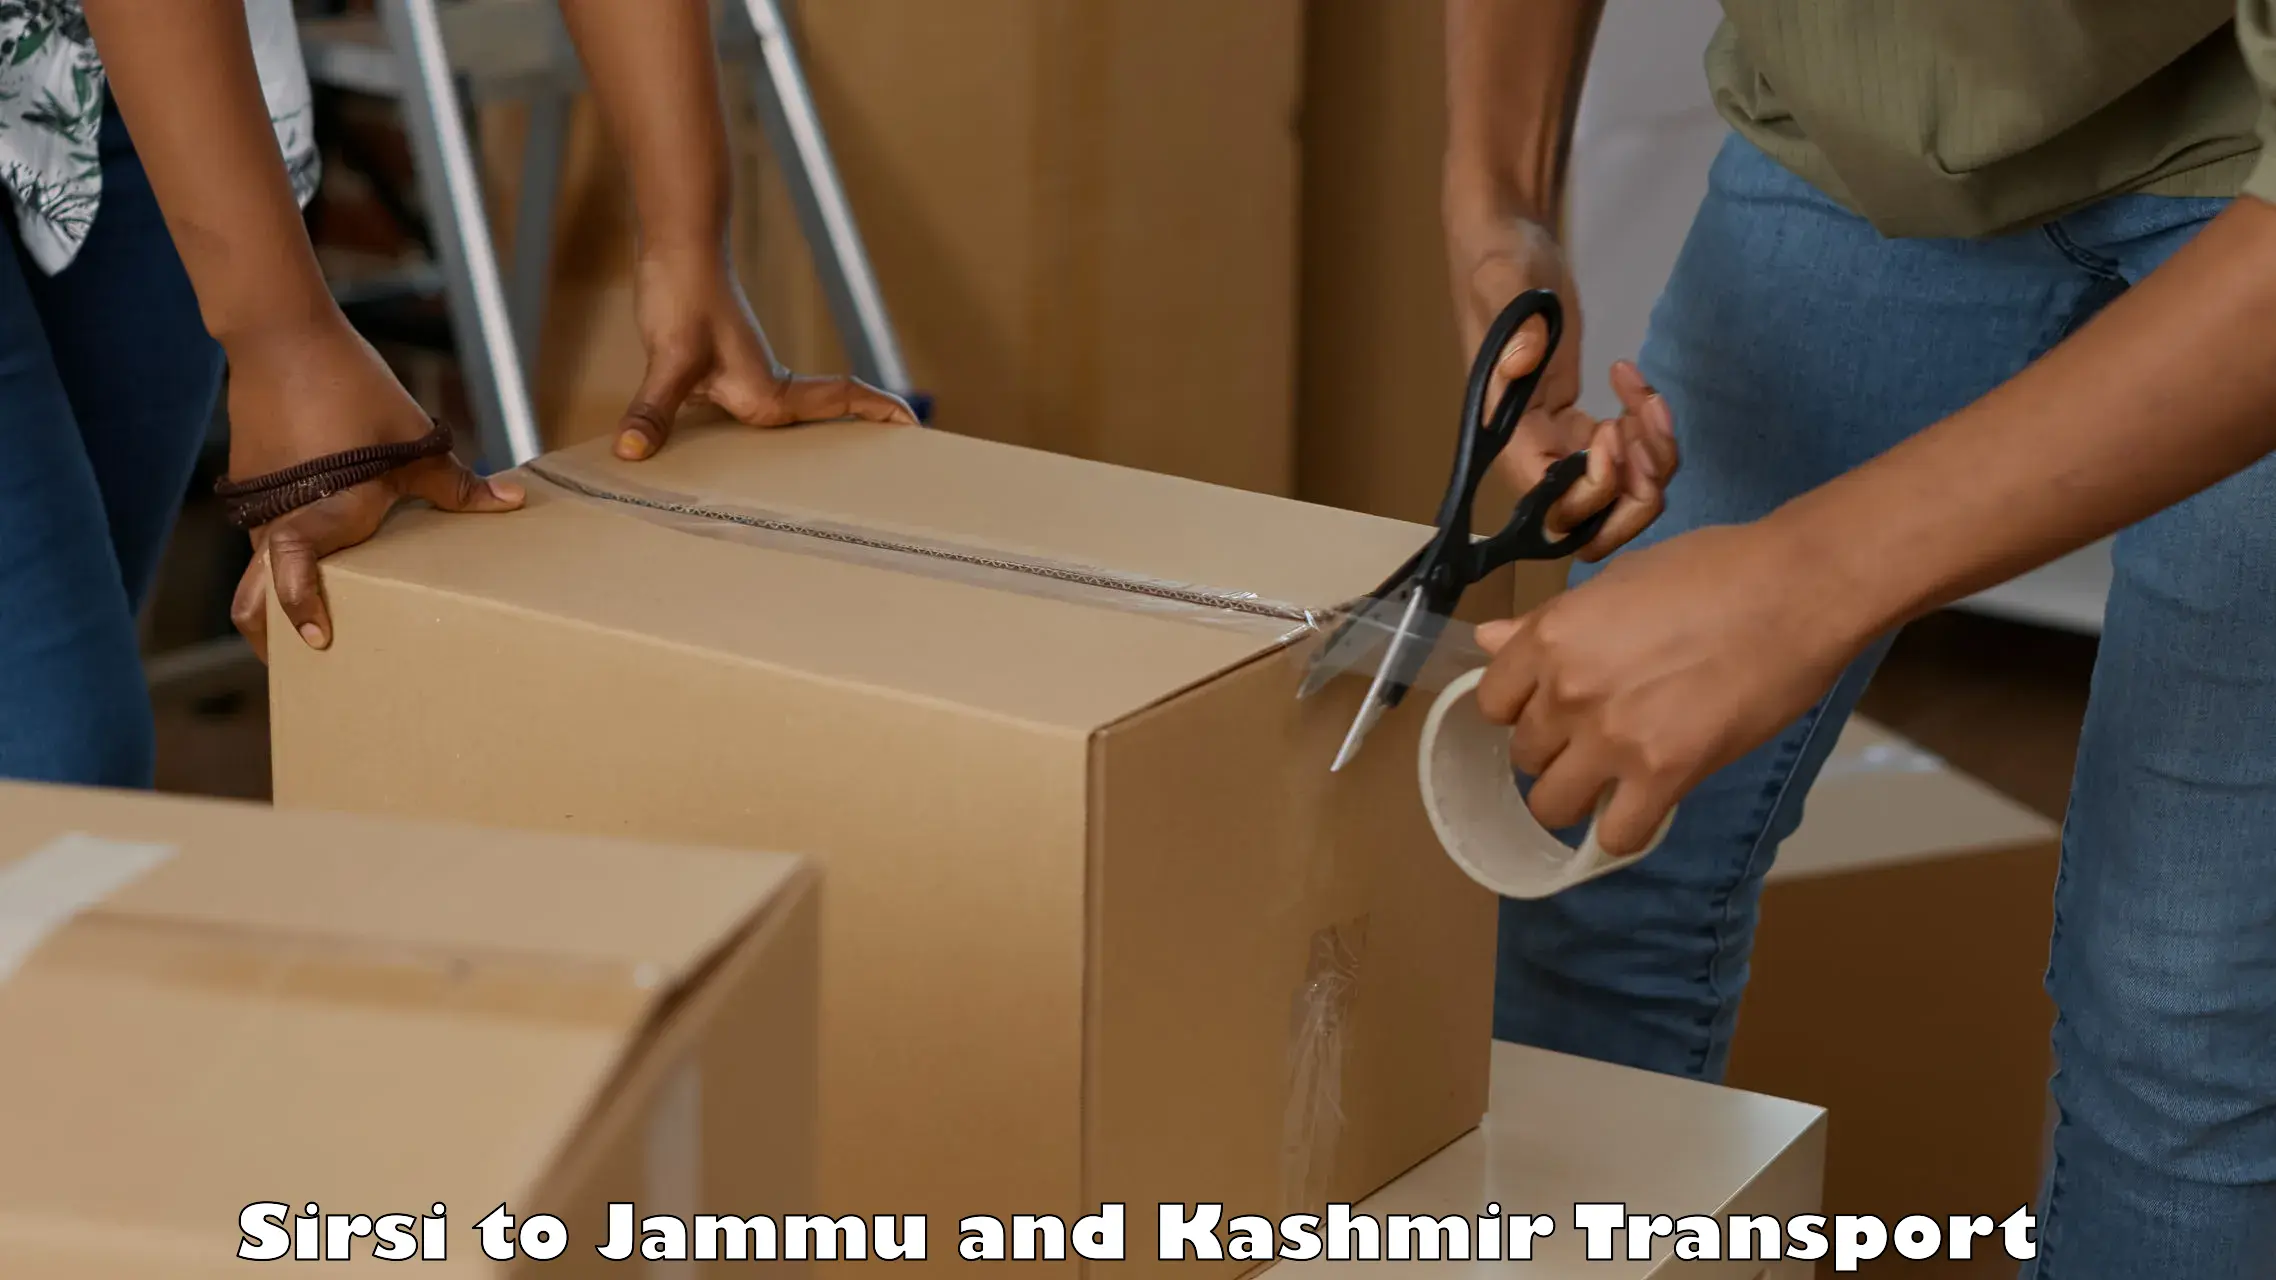 Transport shared services Sirsi to Jammu and Kashmir